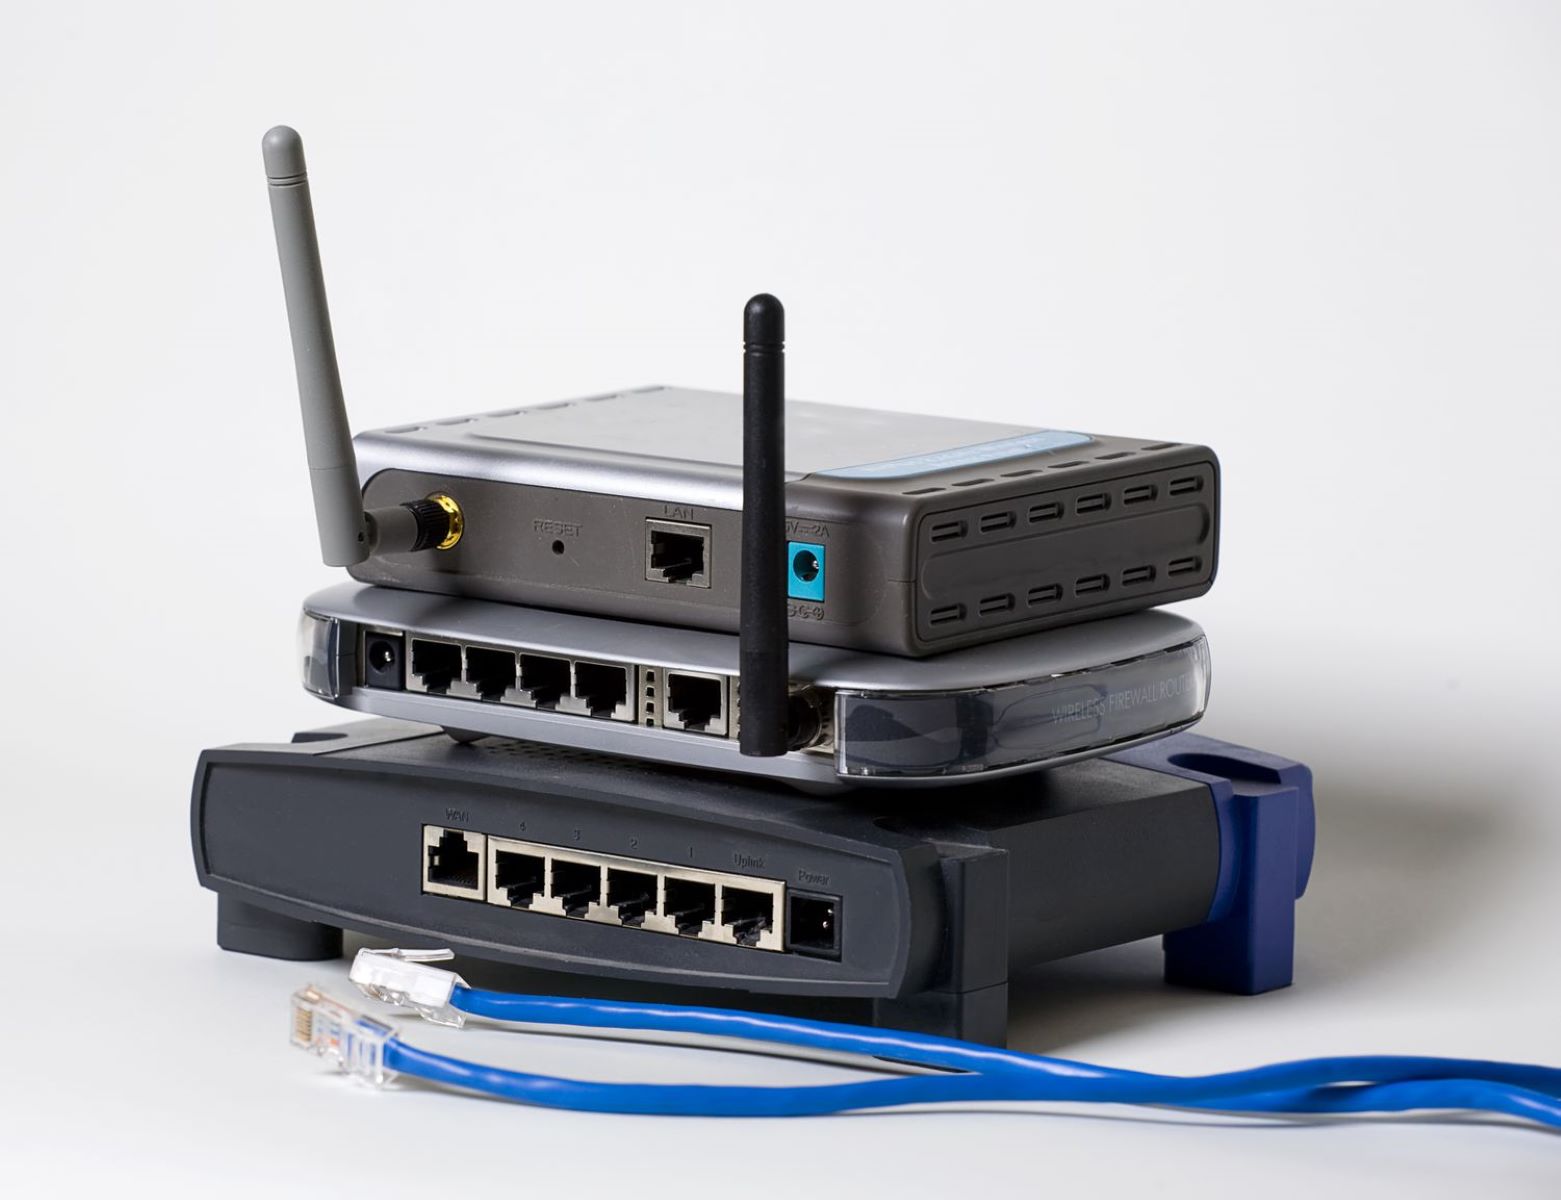 How To Connect Two Wireless Routers On One Modem